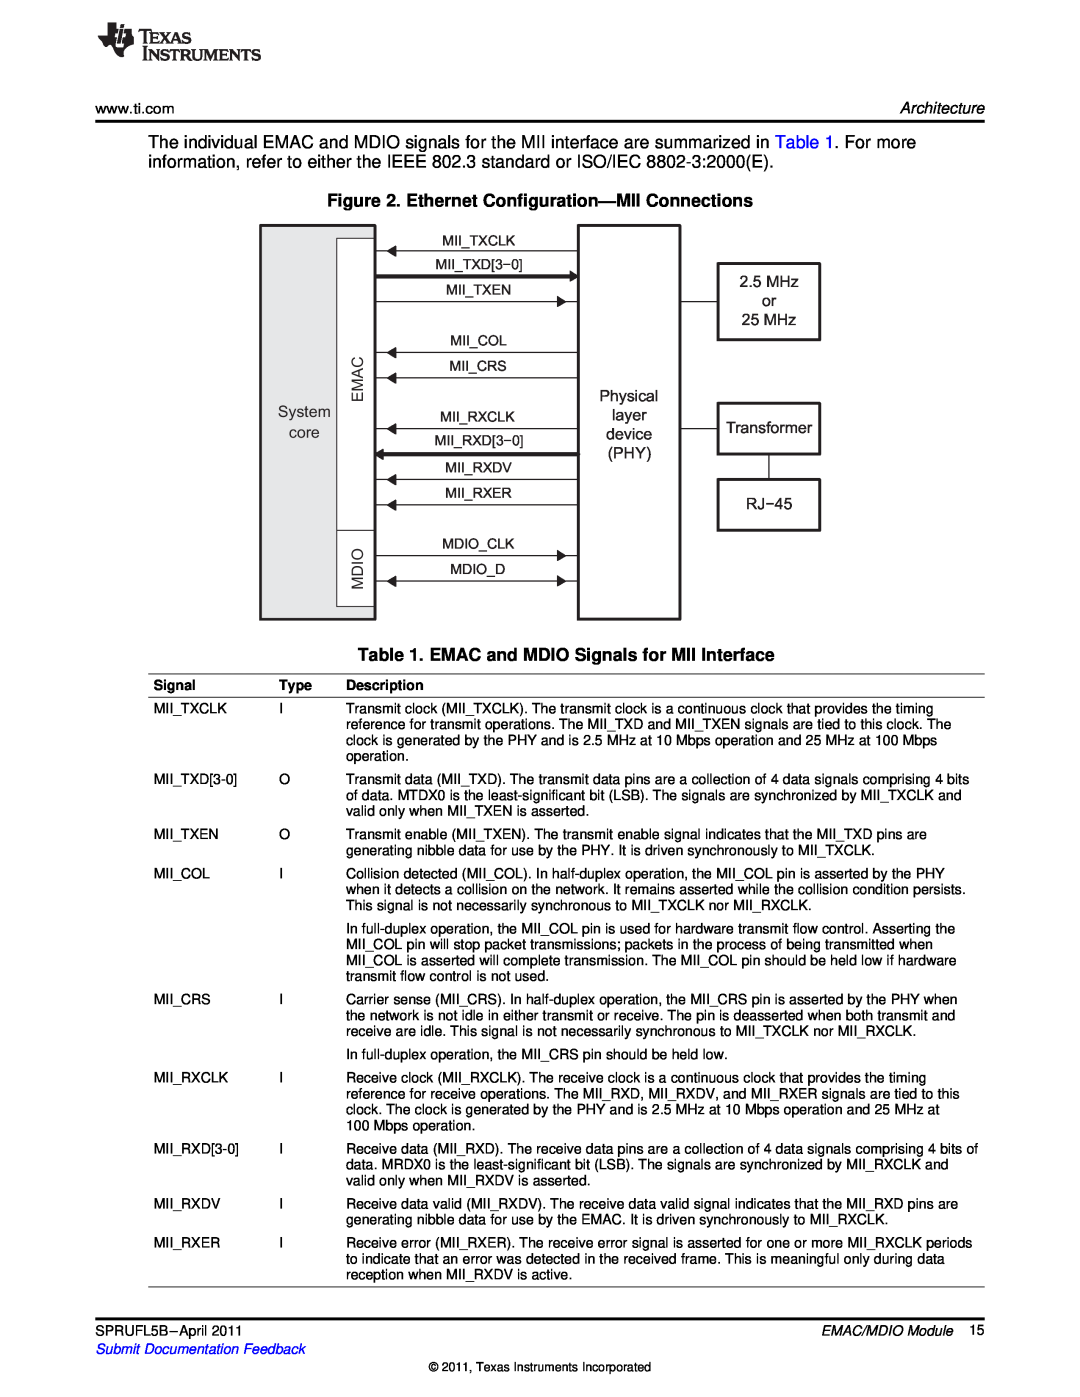 Texas Instruments TMS320C674X manual Ethernet Configuration-MII Connections, EMAC and MDIO Signals for MII Interface, Type 